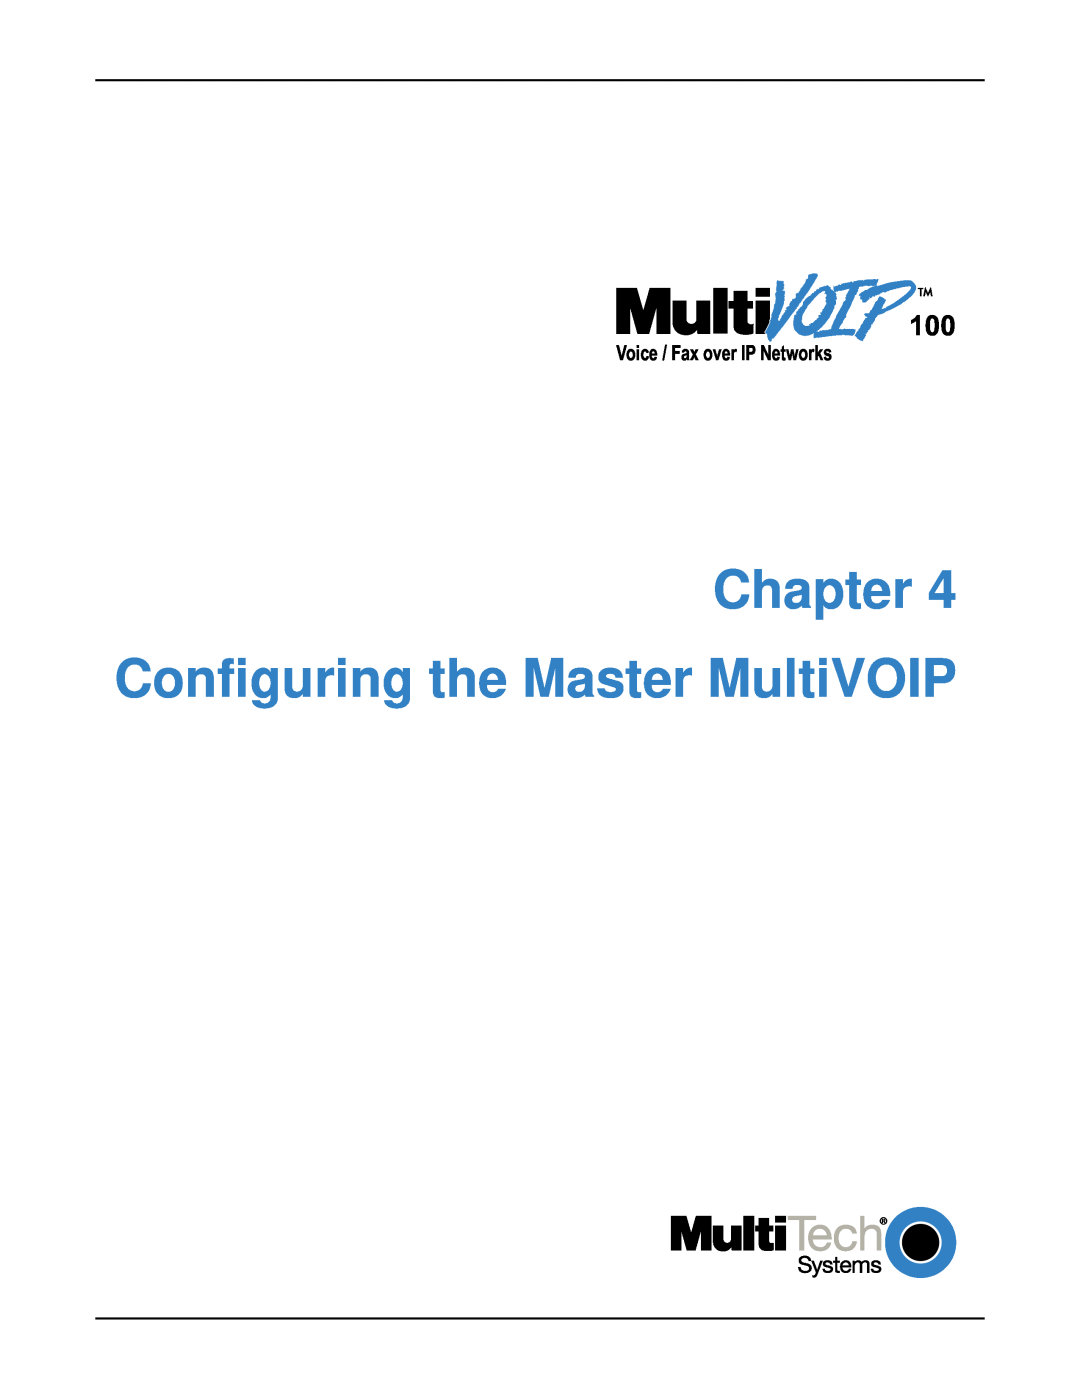 Multi-Tech Systems MVP120 manual Chapter Configuring the Master MultiVOIP, Voice / Fax over IP Networks 